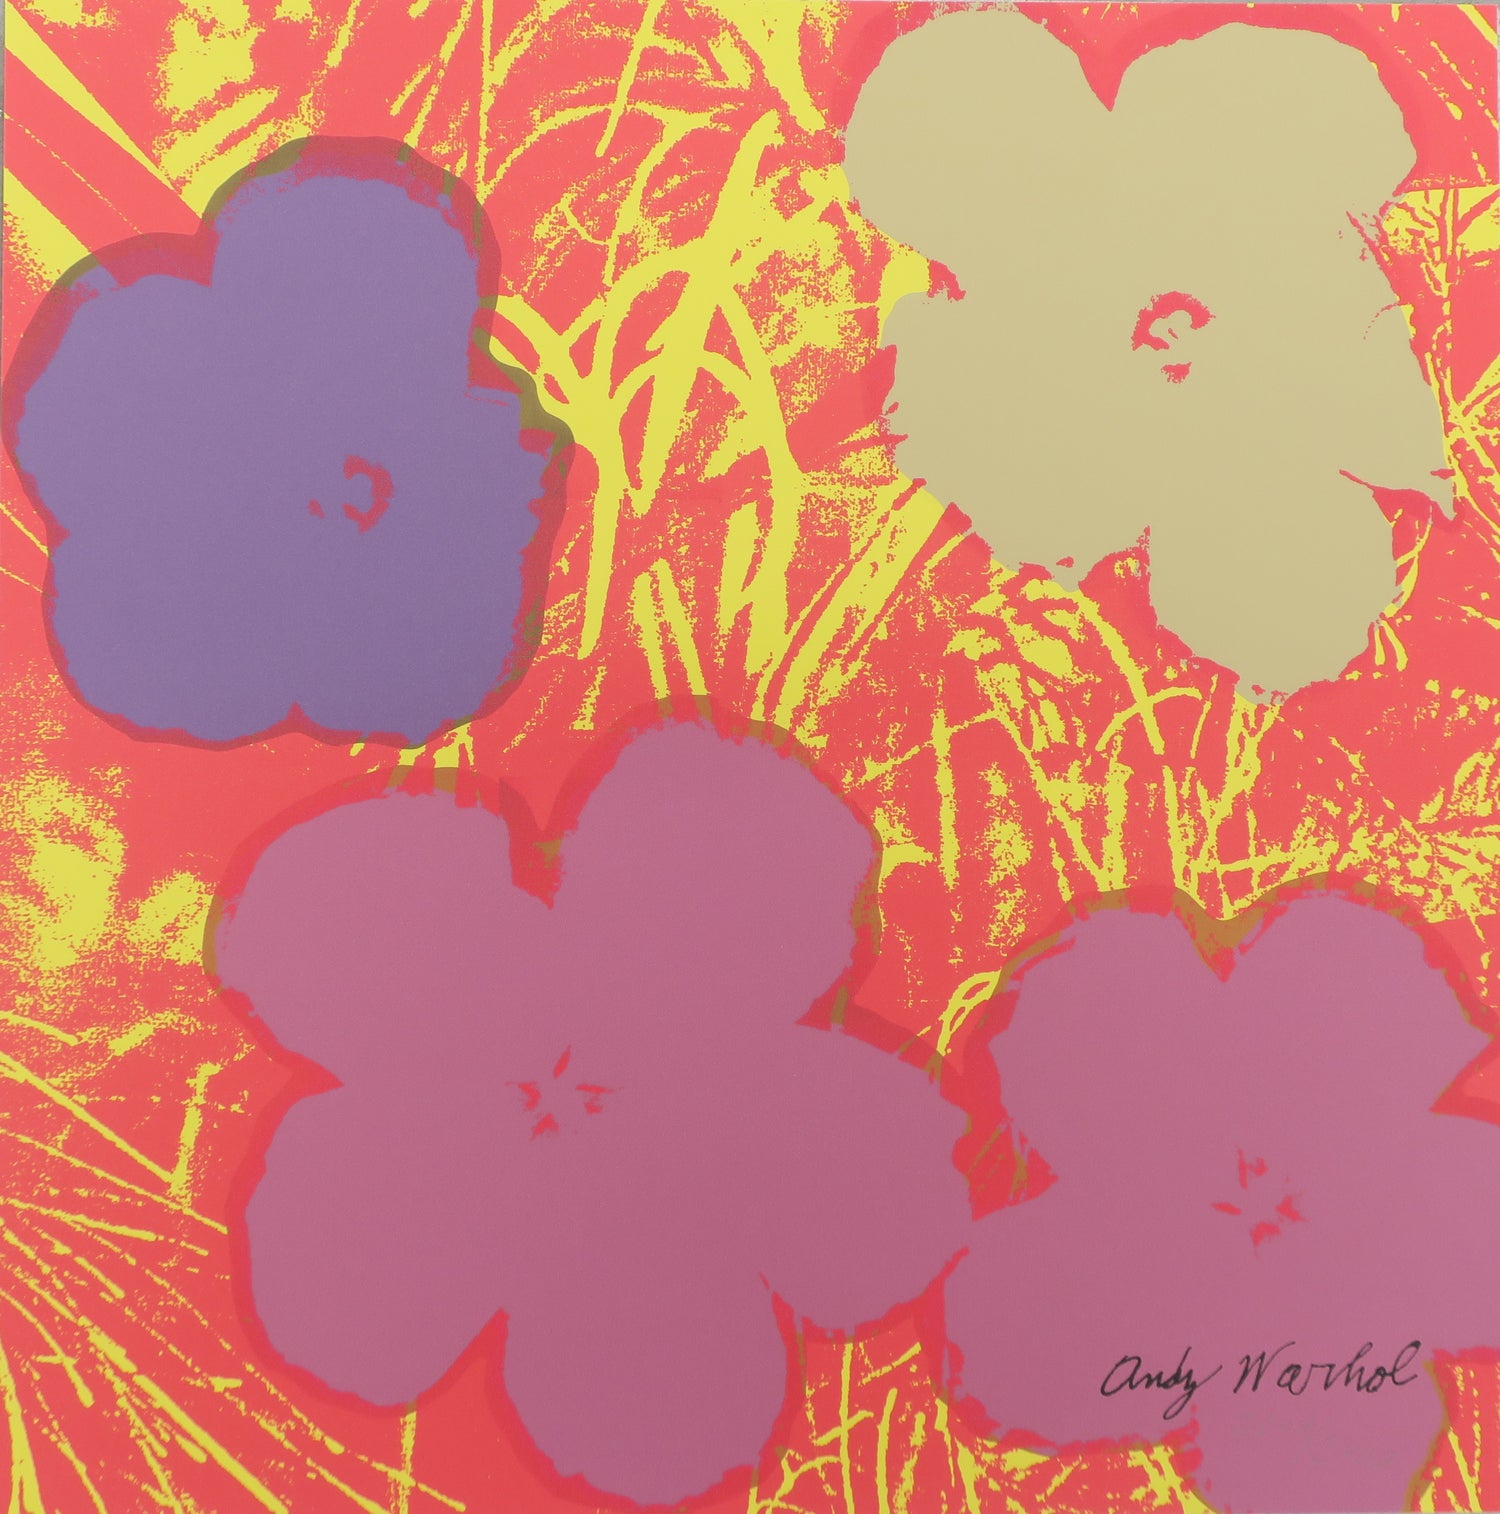 Andy Warhol Flowers signed Lithograph